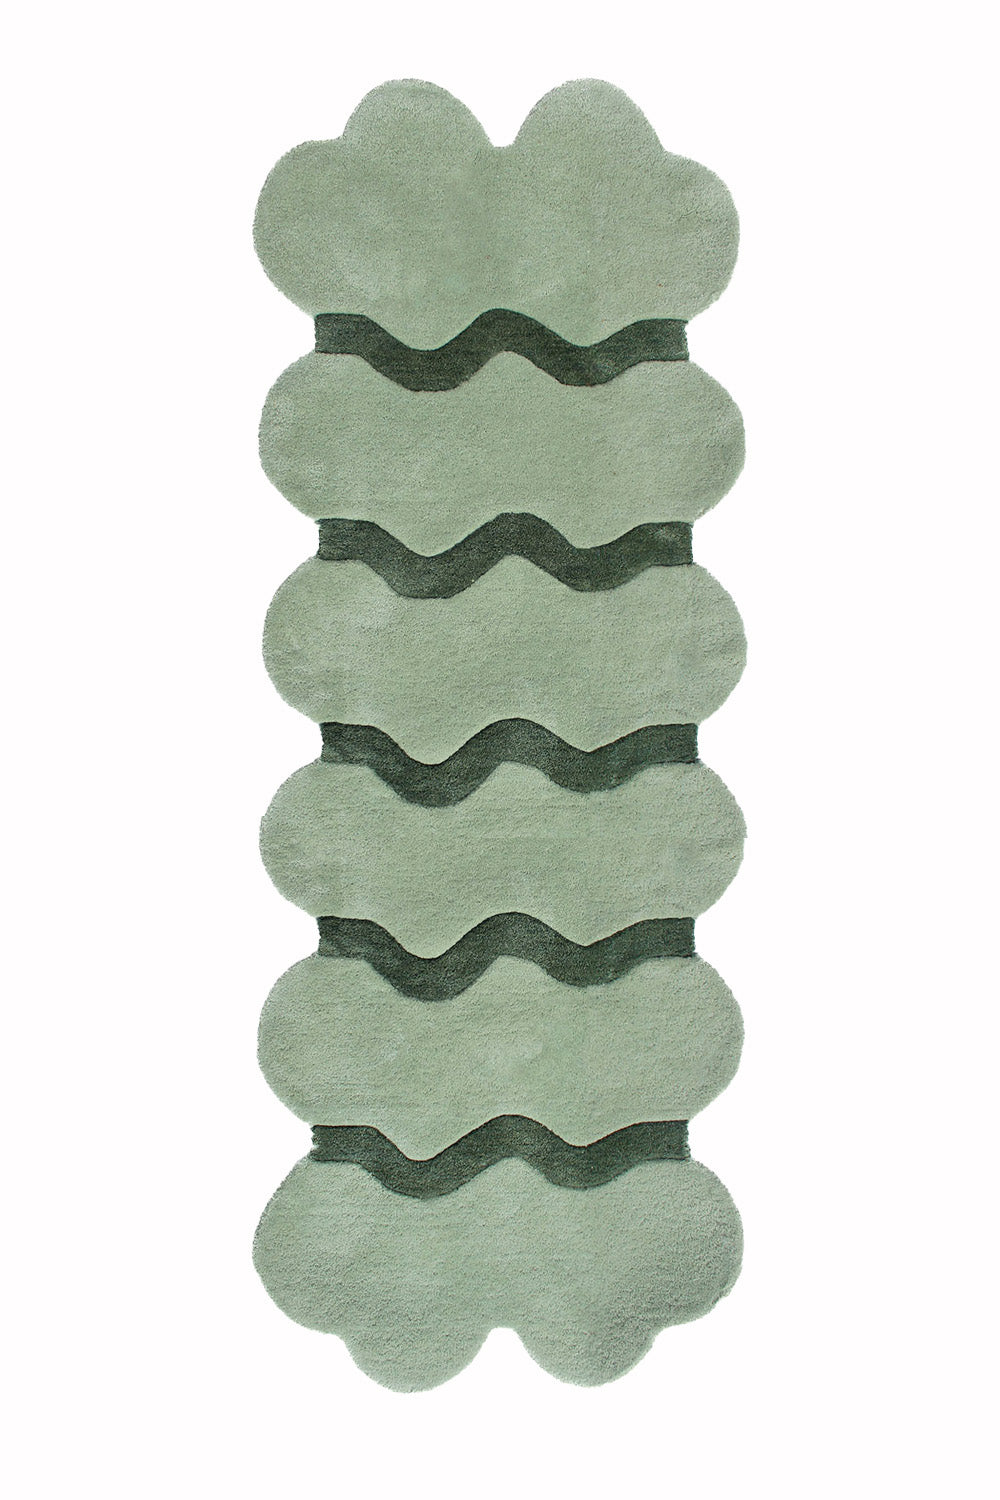 Sculpted Edge Hand Tufted Wool Runner Rug in Green by Jubi